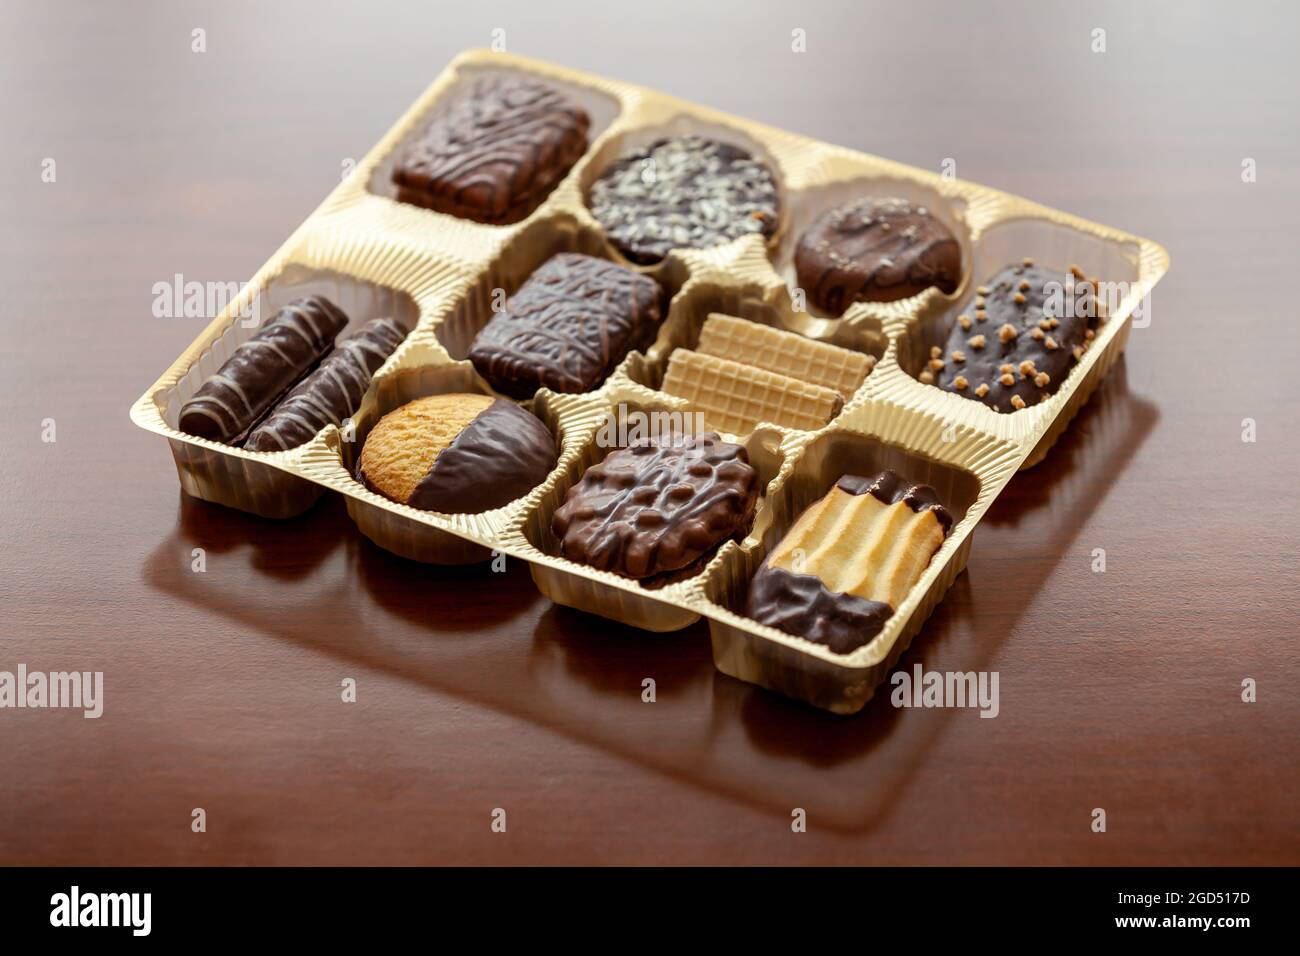 A box full with Assorted biscuits Stock Photo